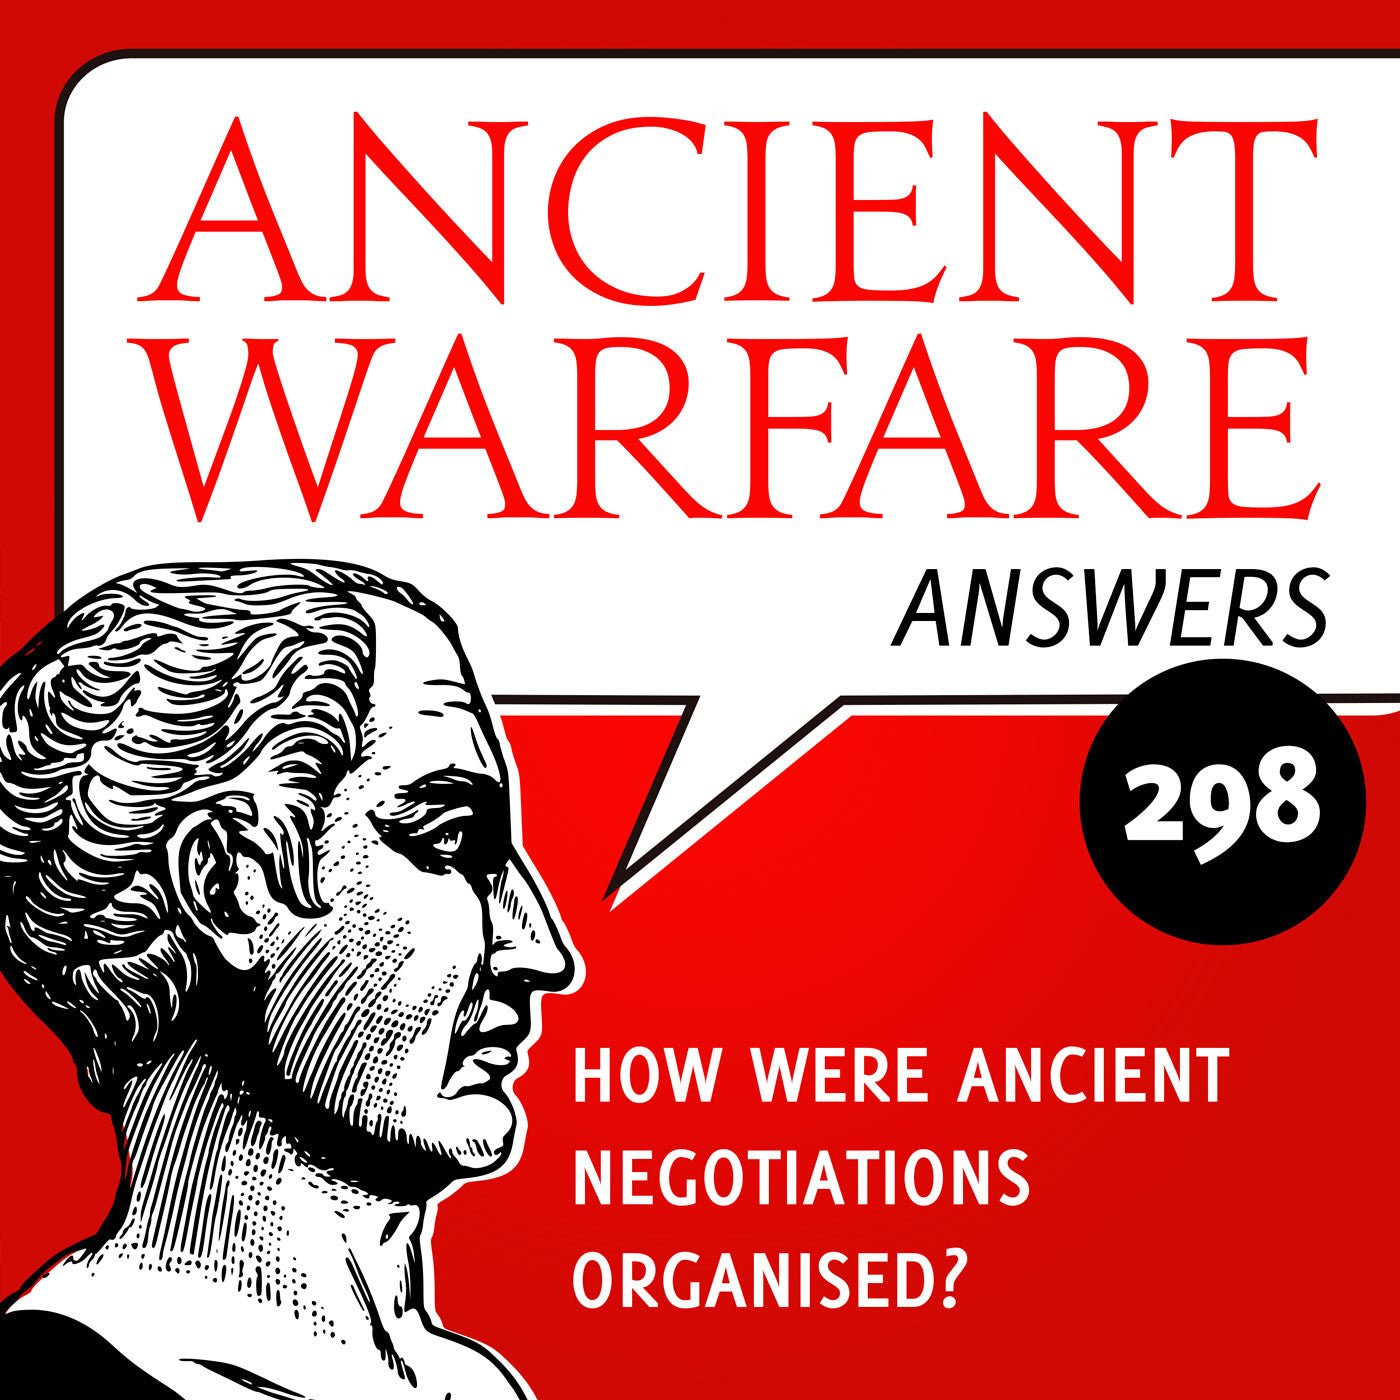 Ancient Warfare Answers (298):  How were ancient negotiations organised?